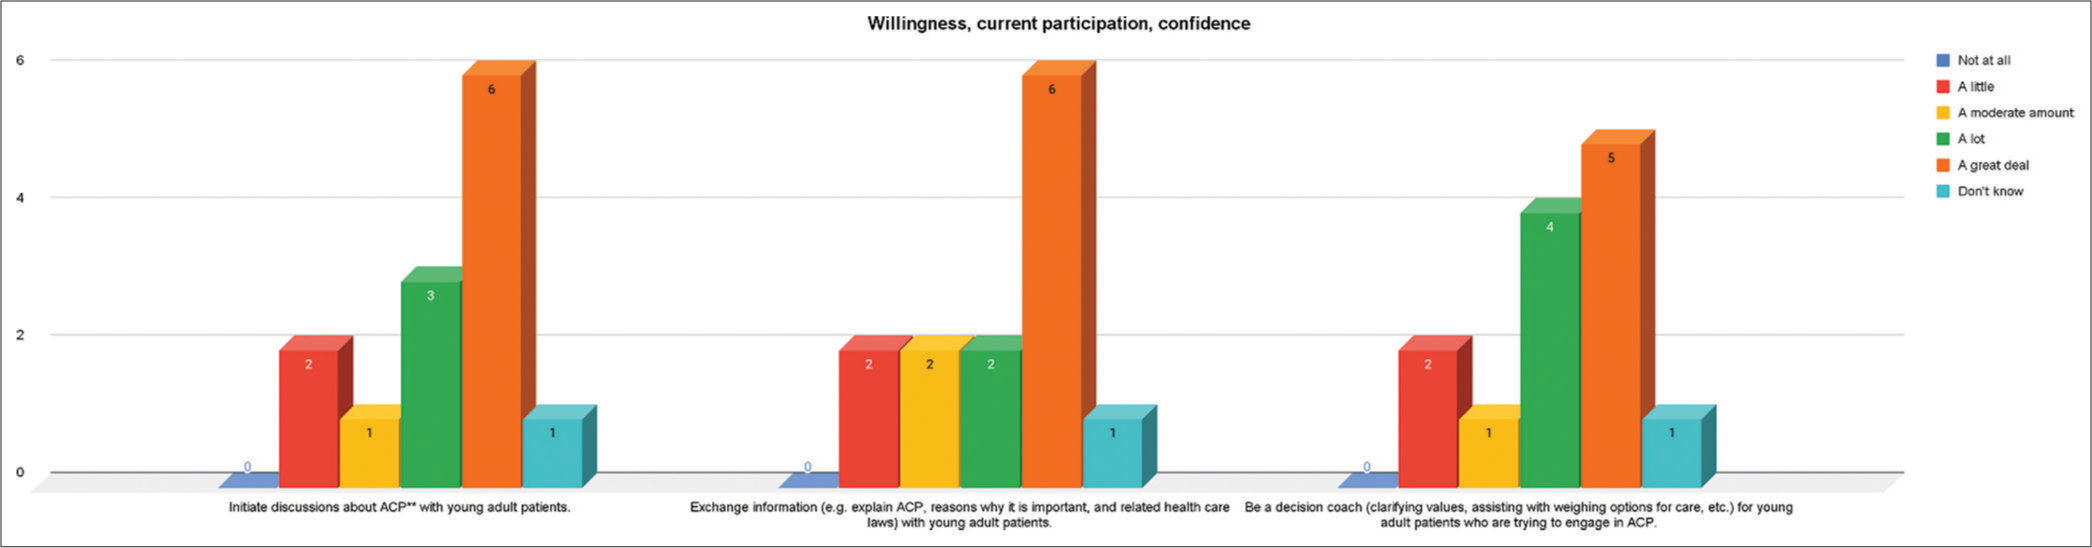 Willingness, current participation and confidence, ACP: Advance Care Planning.